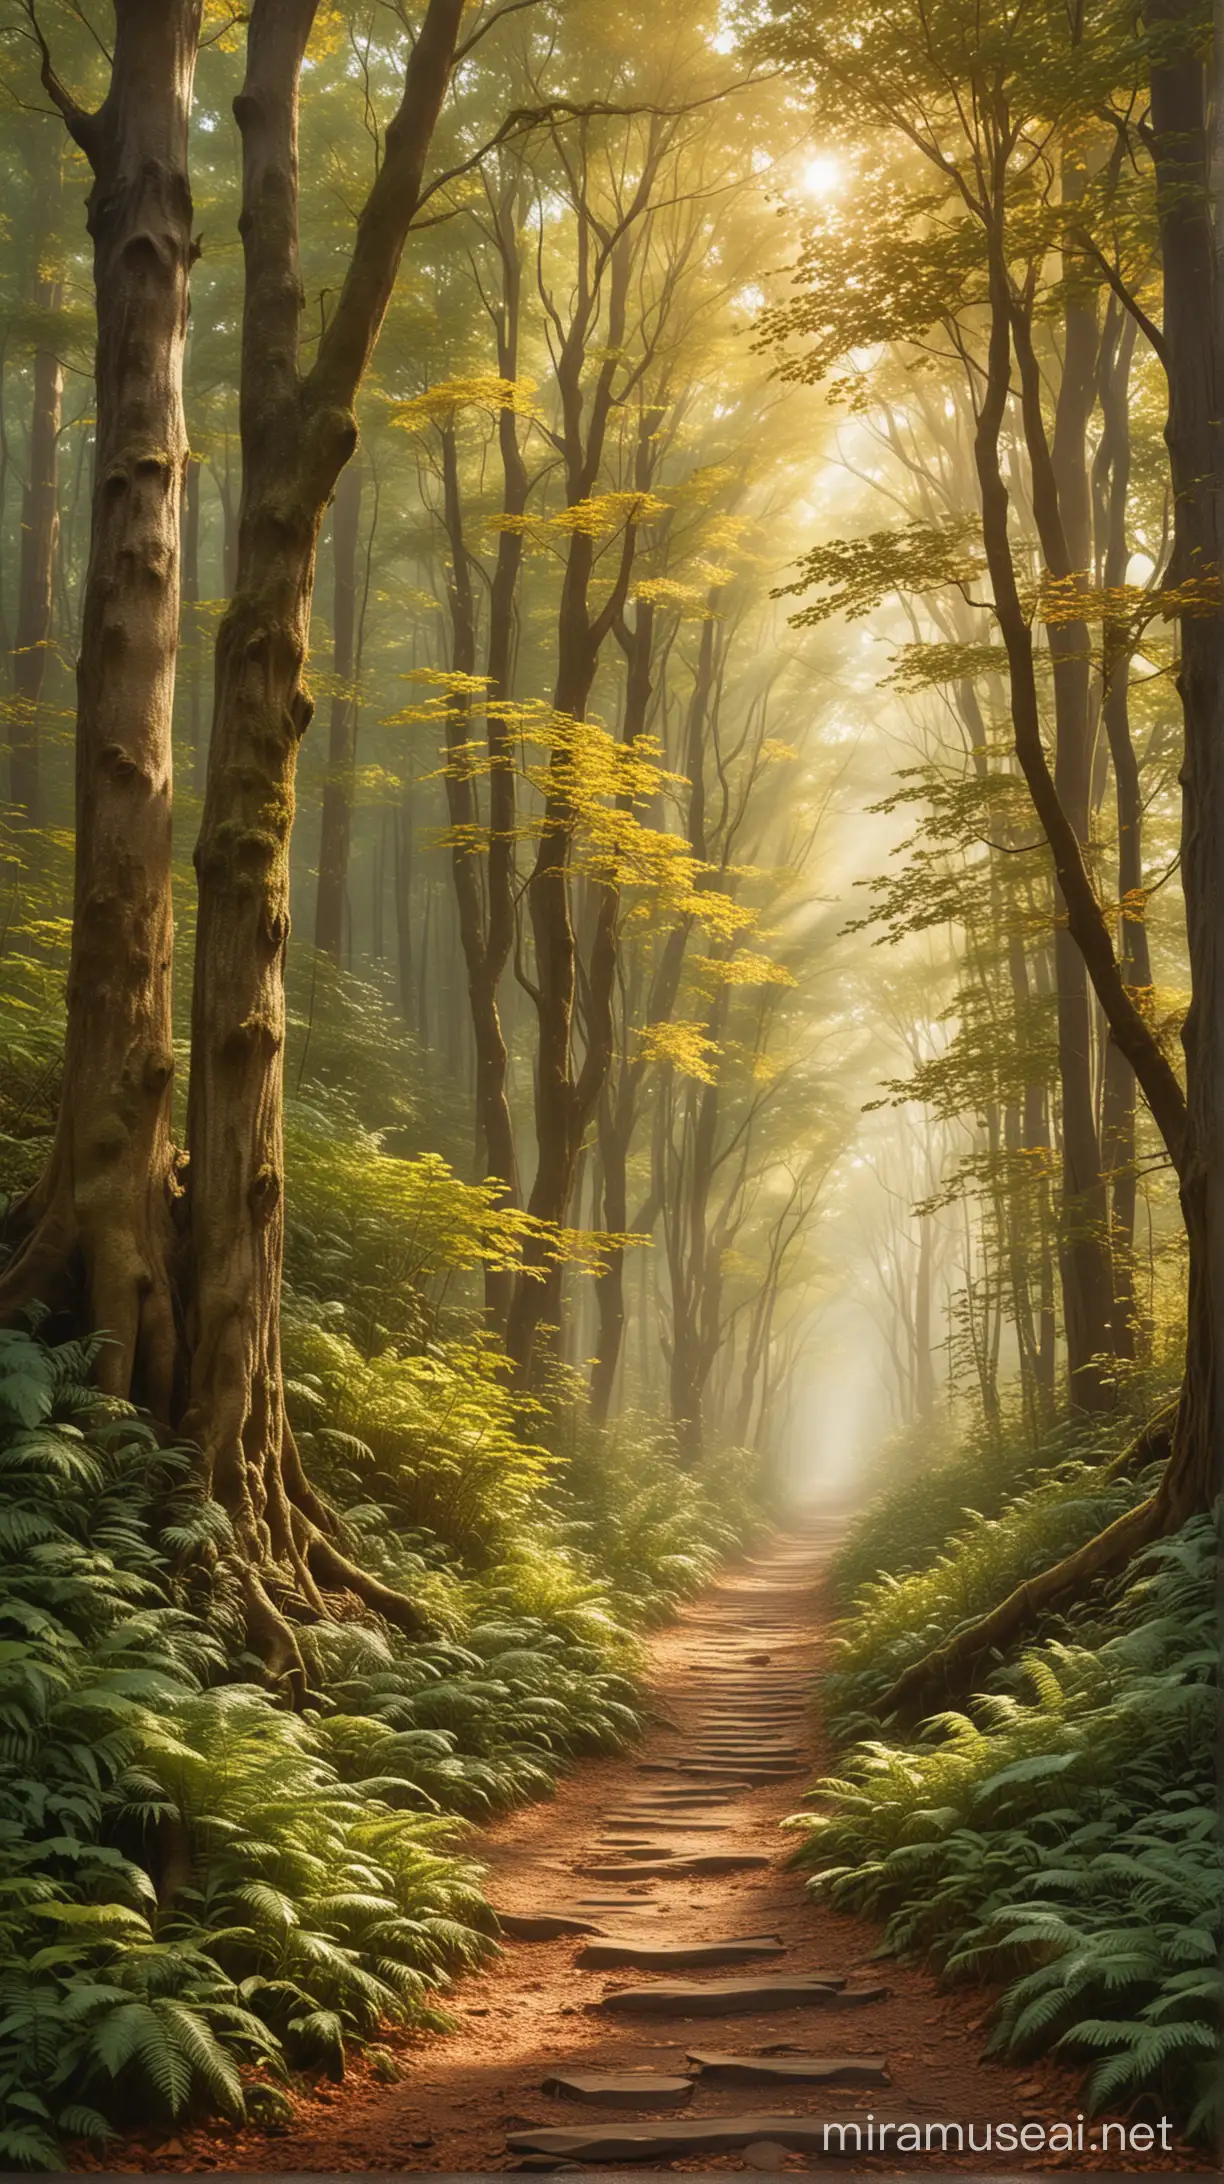 Picture a captivating wall art image that transports the viewer to an enchanted forest. The pathway is lined with ancient, towering trees whose leaves filter the sunlight into a warm, dappled pattern on the forest floor. A light mist swirls around the roots, adding a mystical quality to the scene. The color palette is rich with greens, browns, and golden hues, evoking a sense of tranquility and awe. This piece would bring a touch of nature's magic into any room